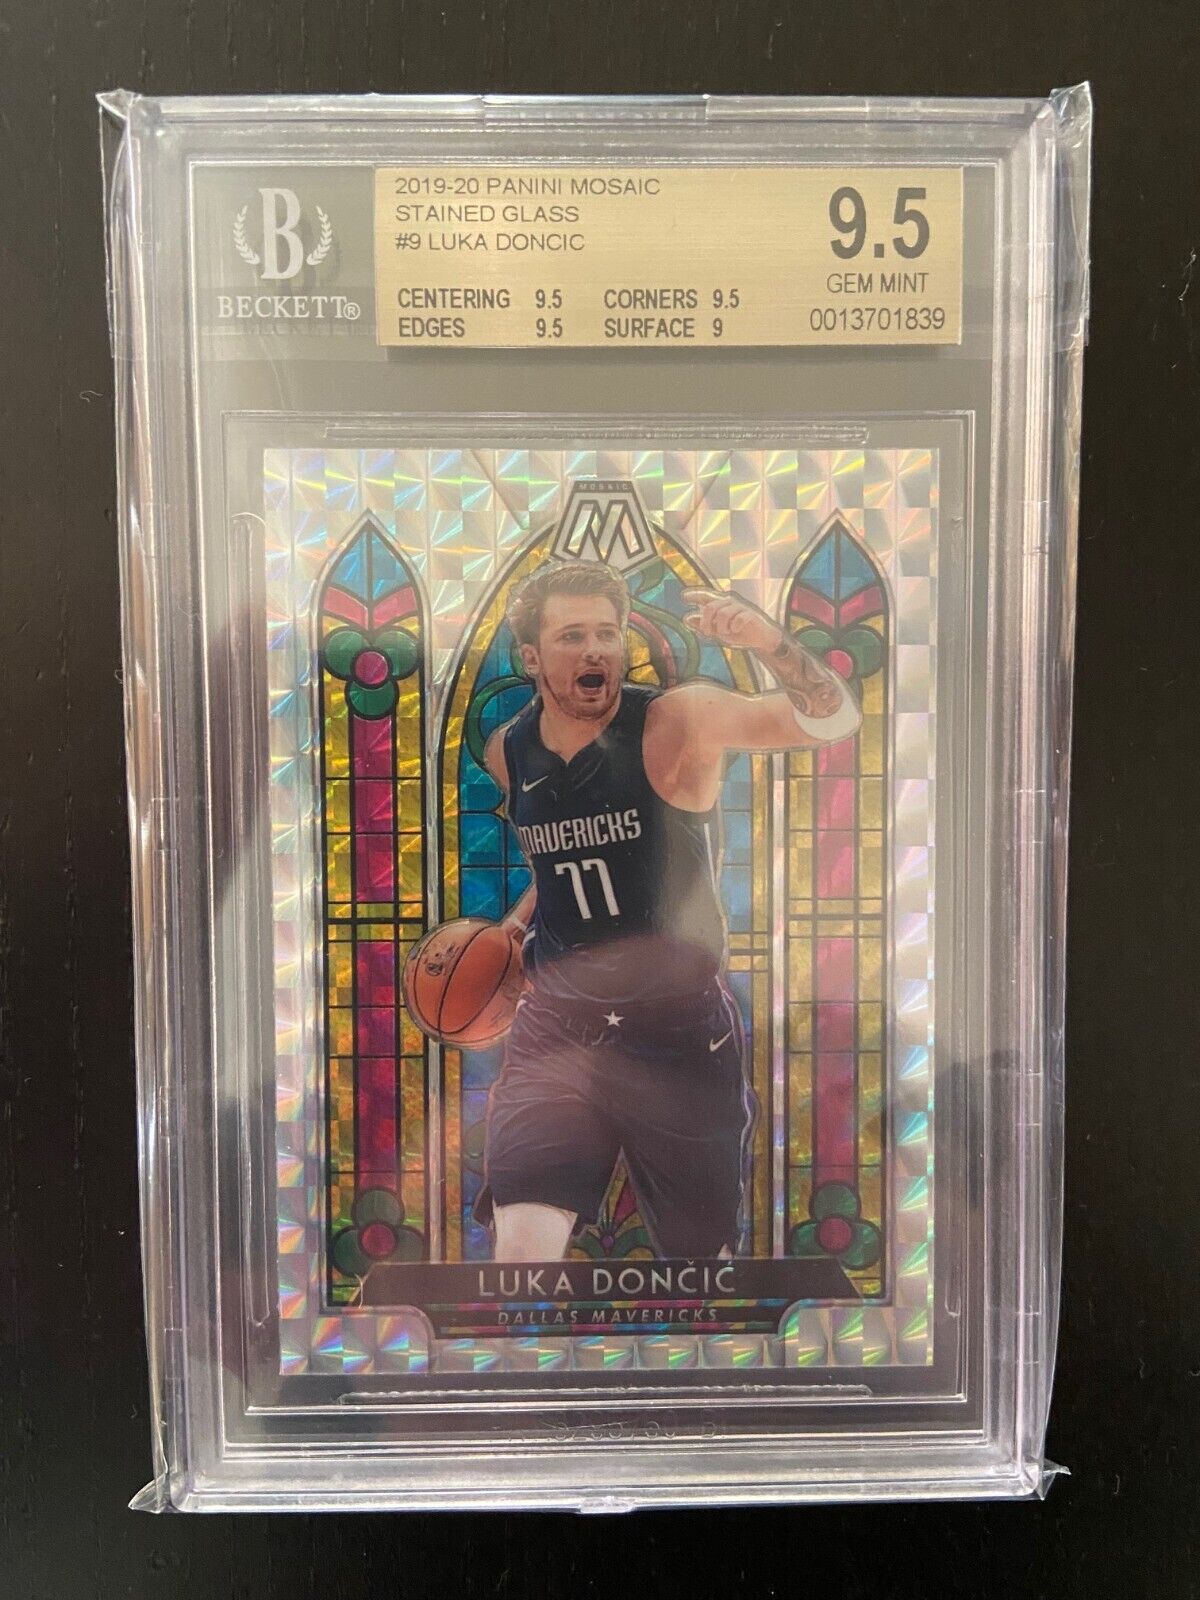 2019 Panini Mosaic Stained Glass Luka Doncic #9 BGS9.5